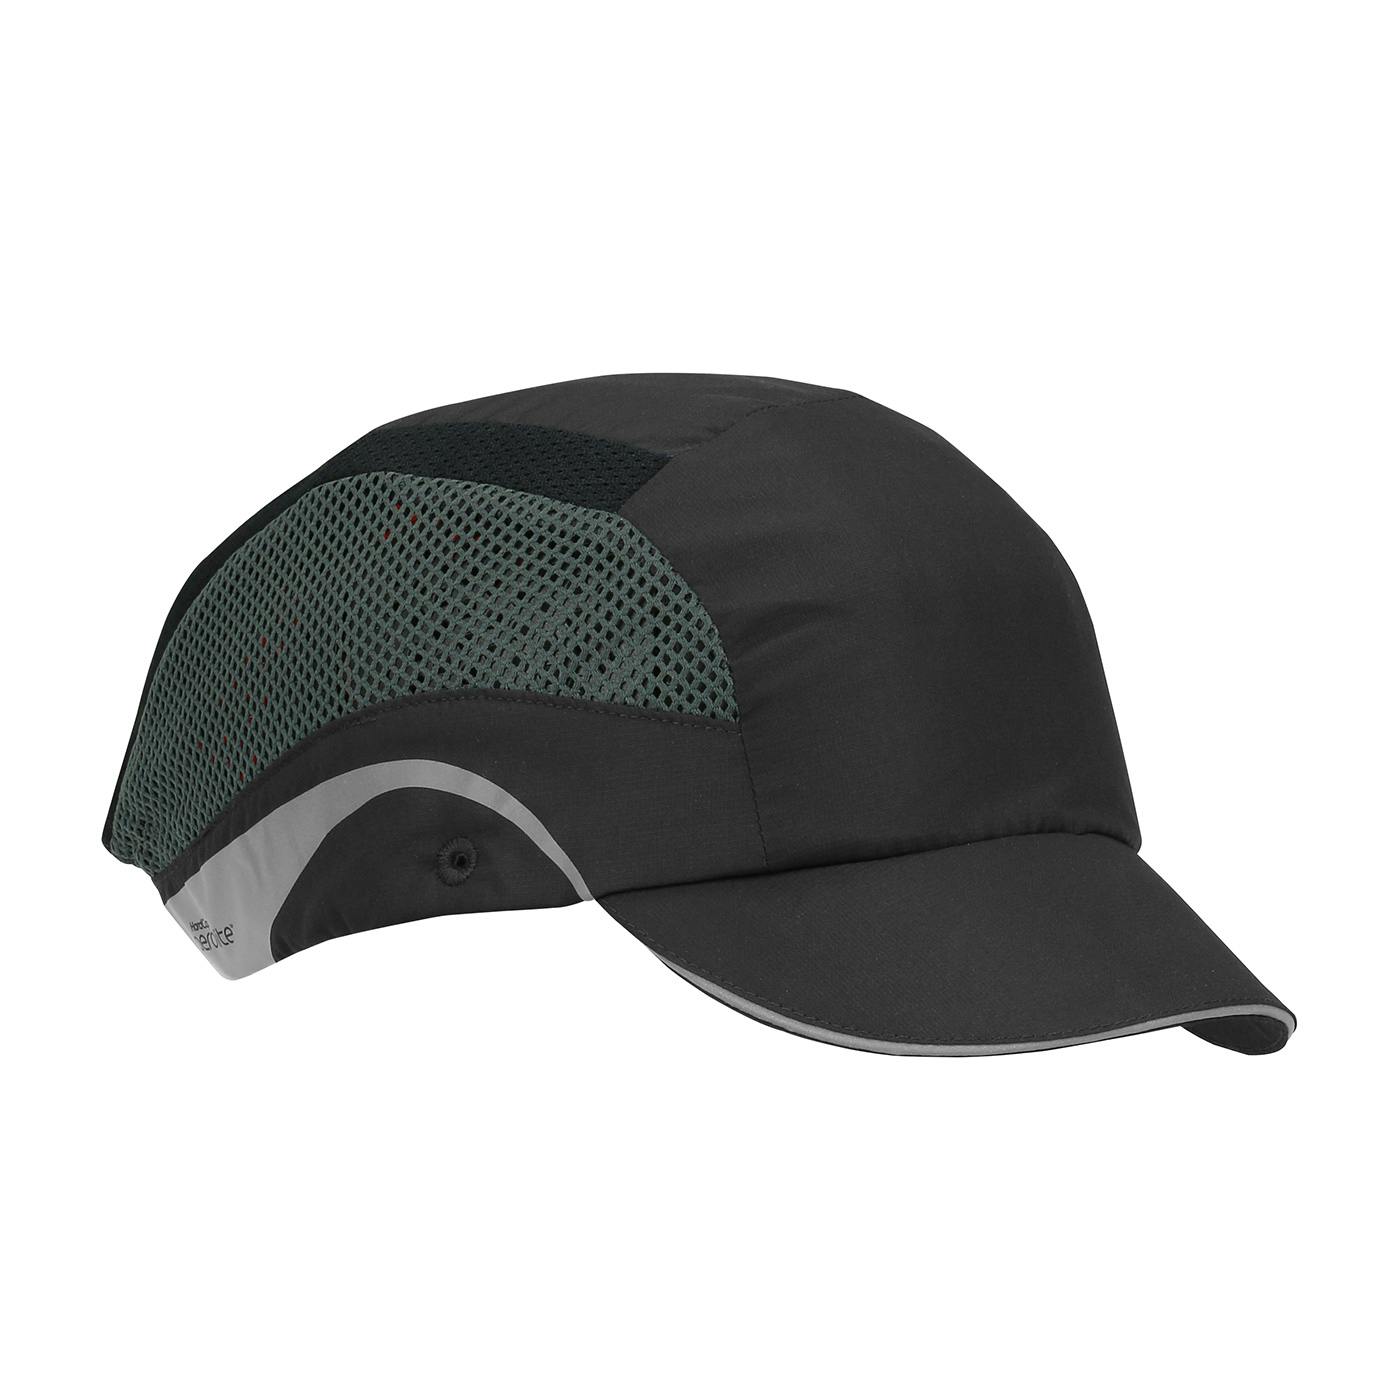 HardCap Aerolite™ Lightweight Baseball Style Bump Cap with HDPE Protective Liner and Adjustable Back - Short Brim (282-AES150)